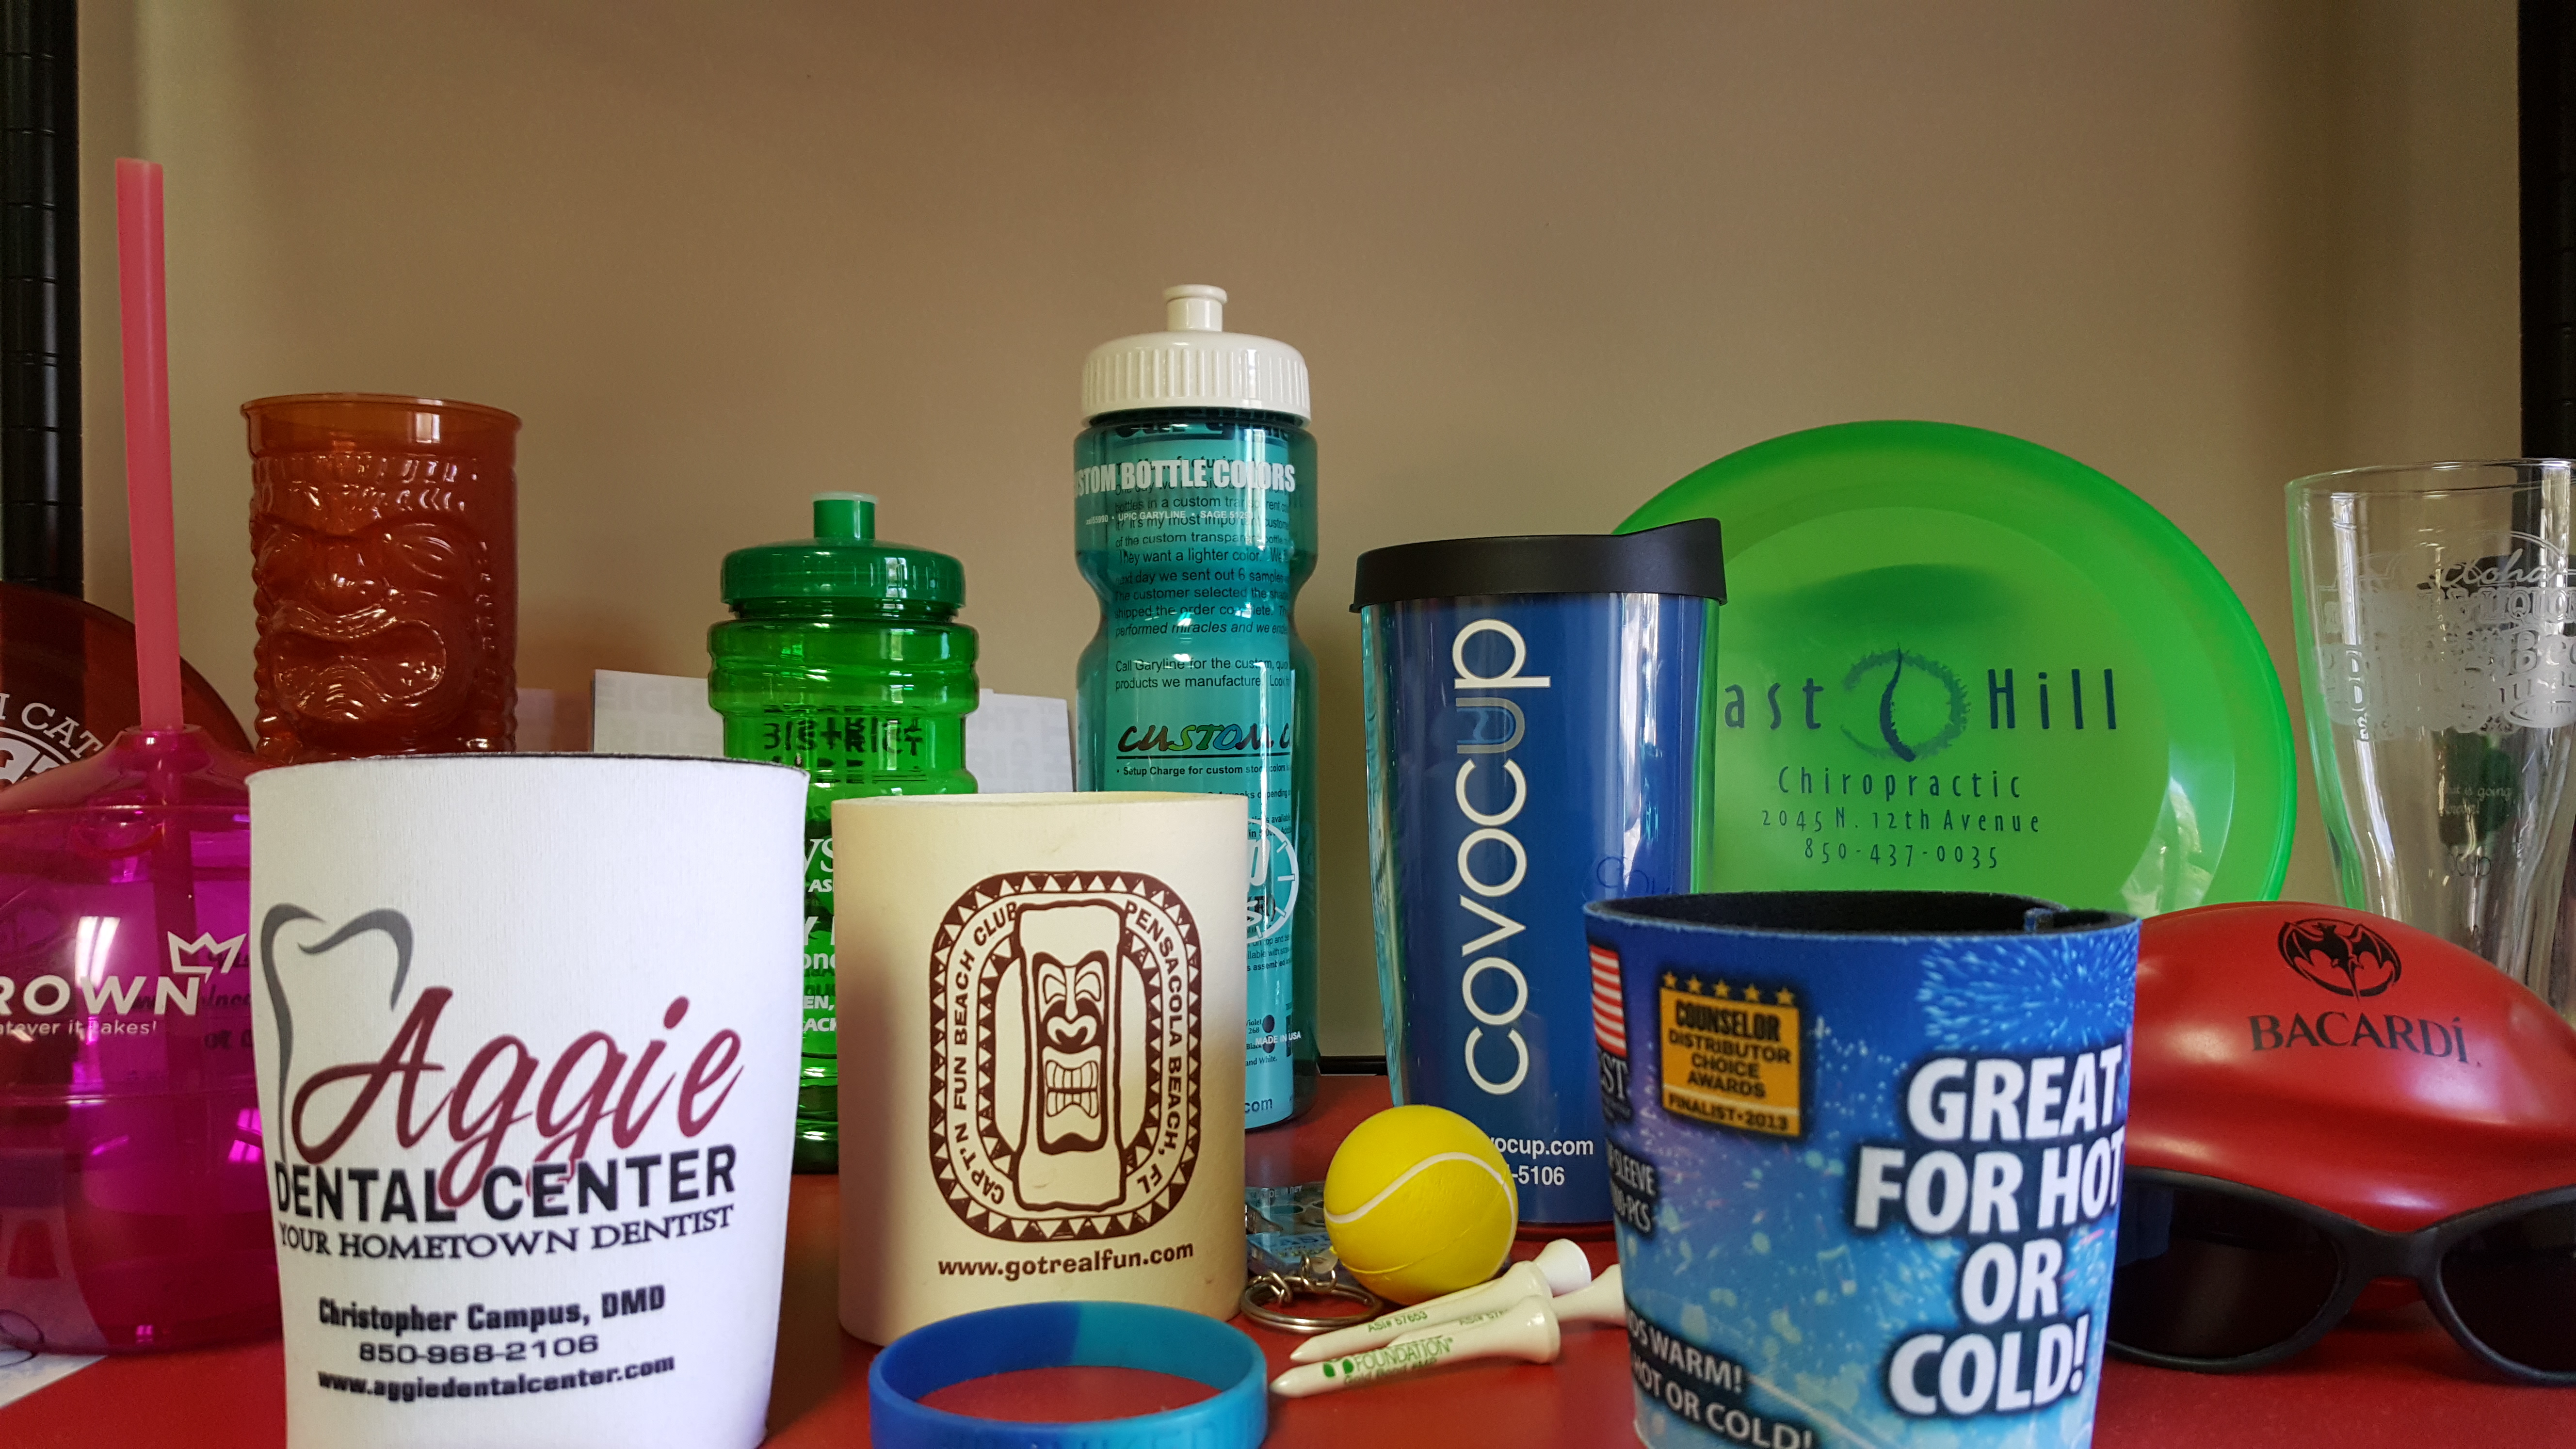 Just a few of the items we offer for your promotional needs. Please give us a call for more information regarding products and pricing.